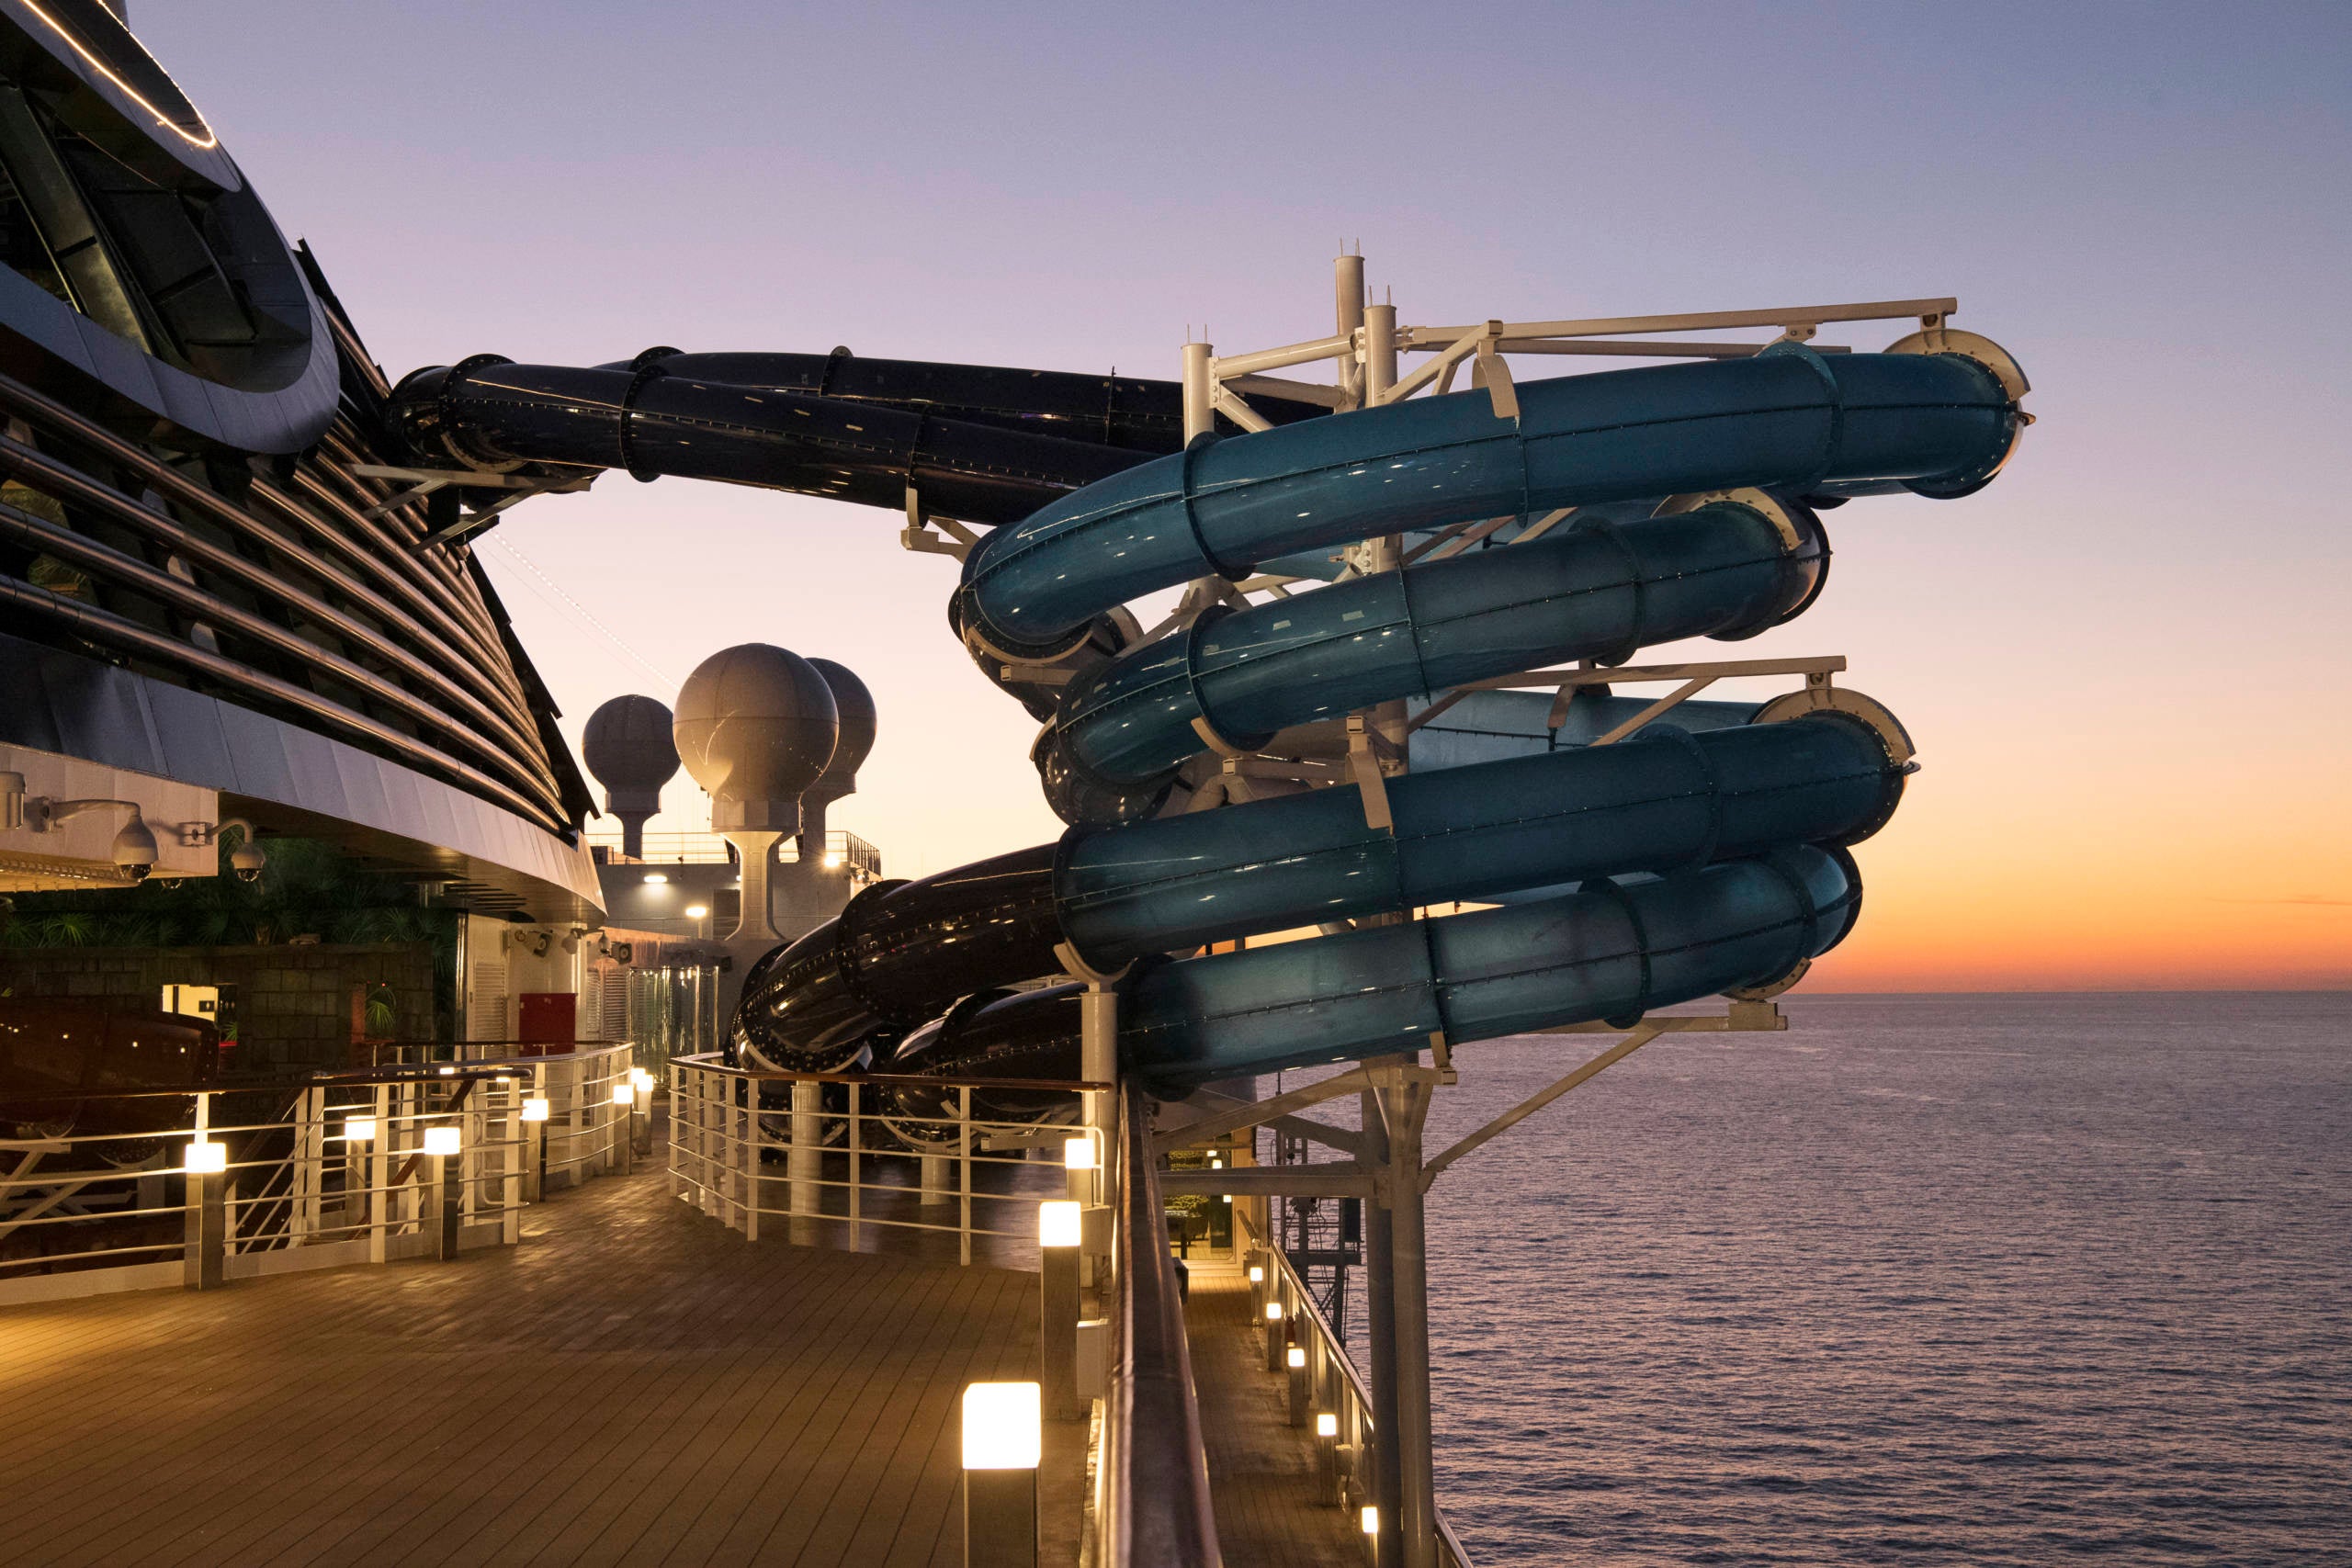 A corkscrew waterslide on the MSC Cruises ship MSC Seaside. It's one of four waterslides on the vessel. (Photo courtesy of MSC Cruises).